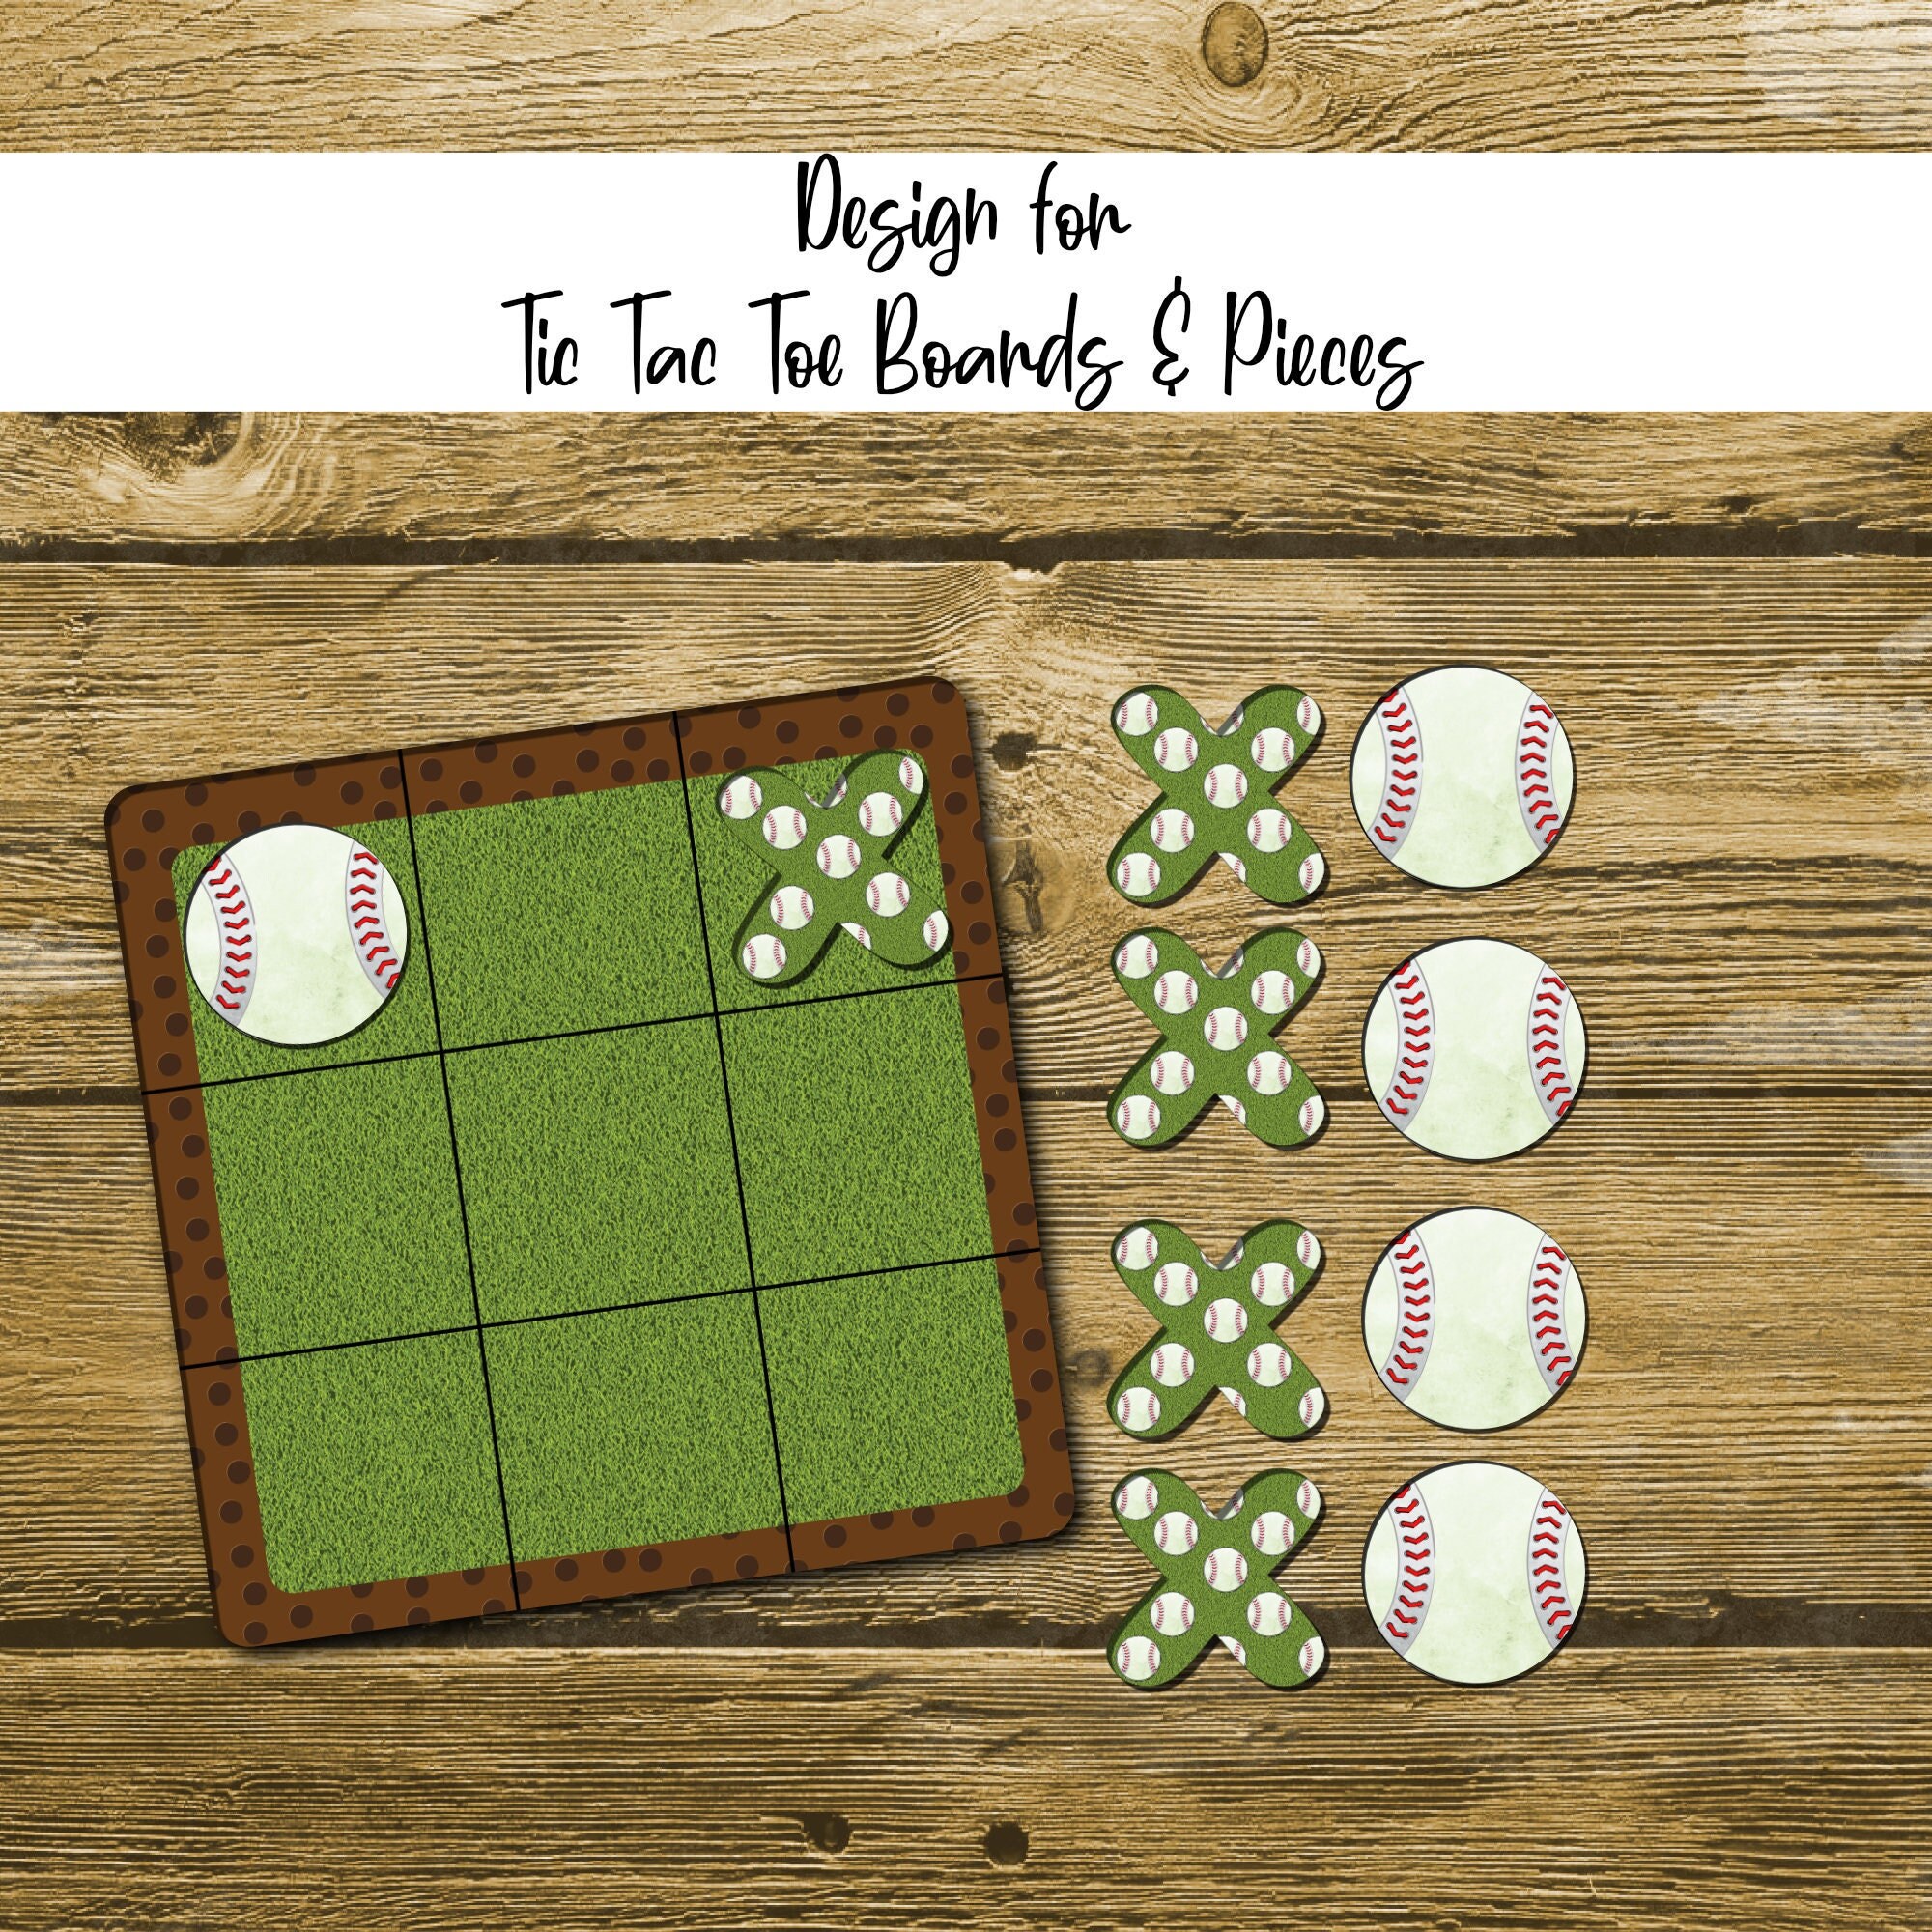 Tic tac toe board and 10 chips (size 5x5)- Sublimation Blank